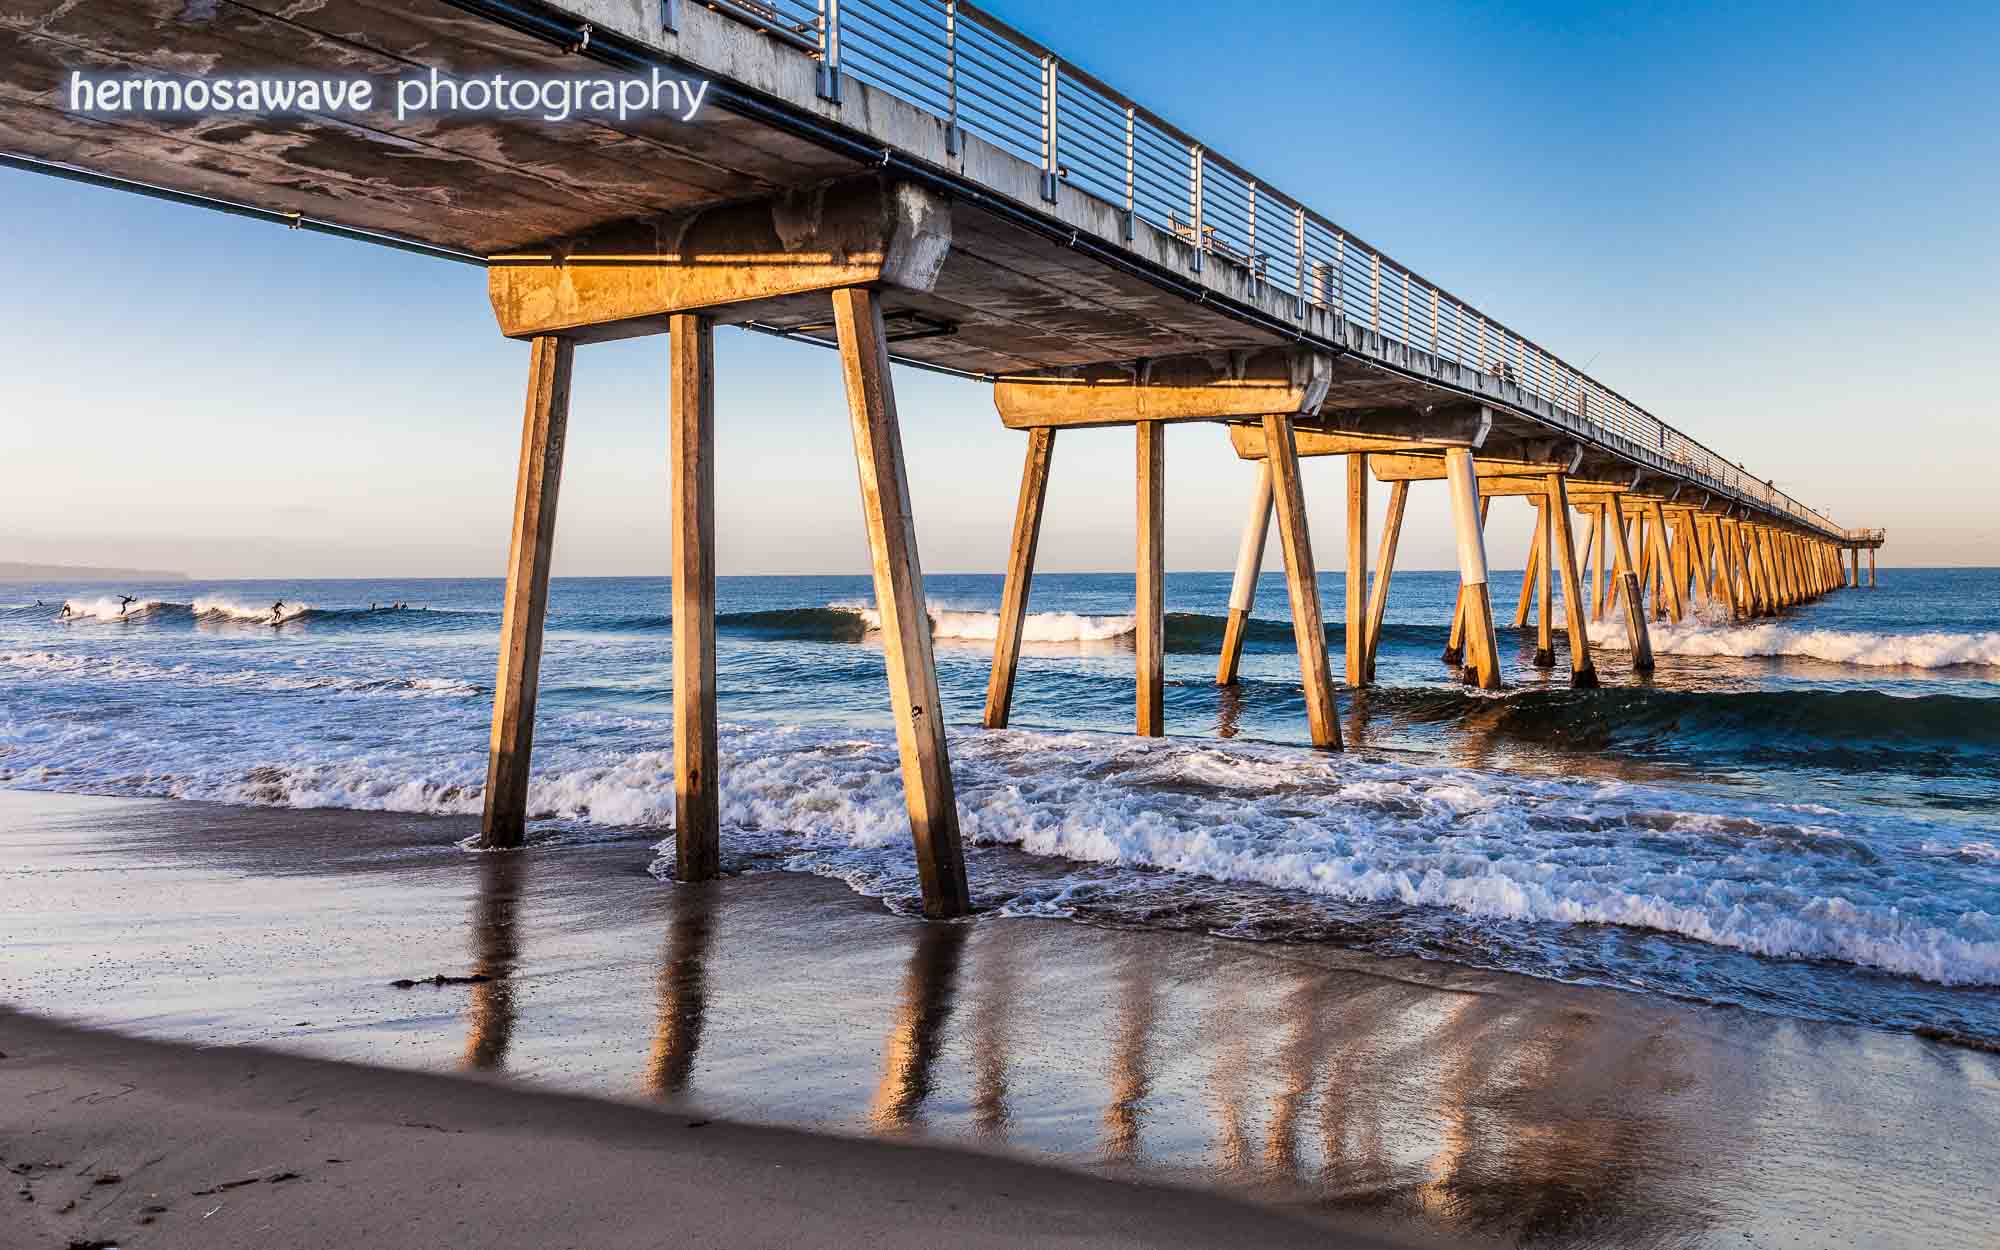 Morning at the Hermosa Pier